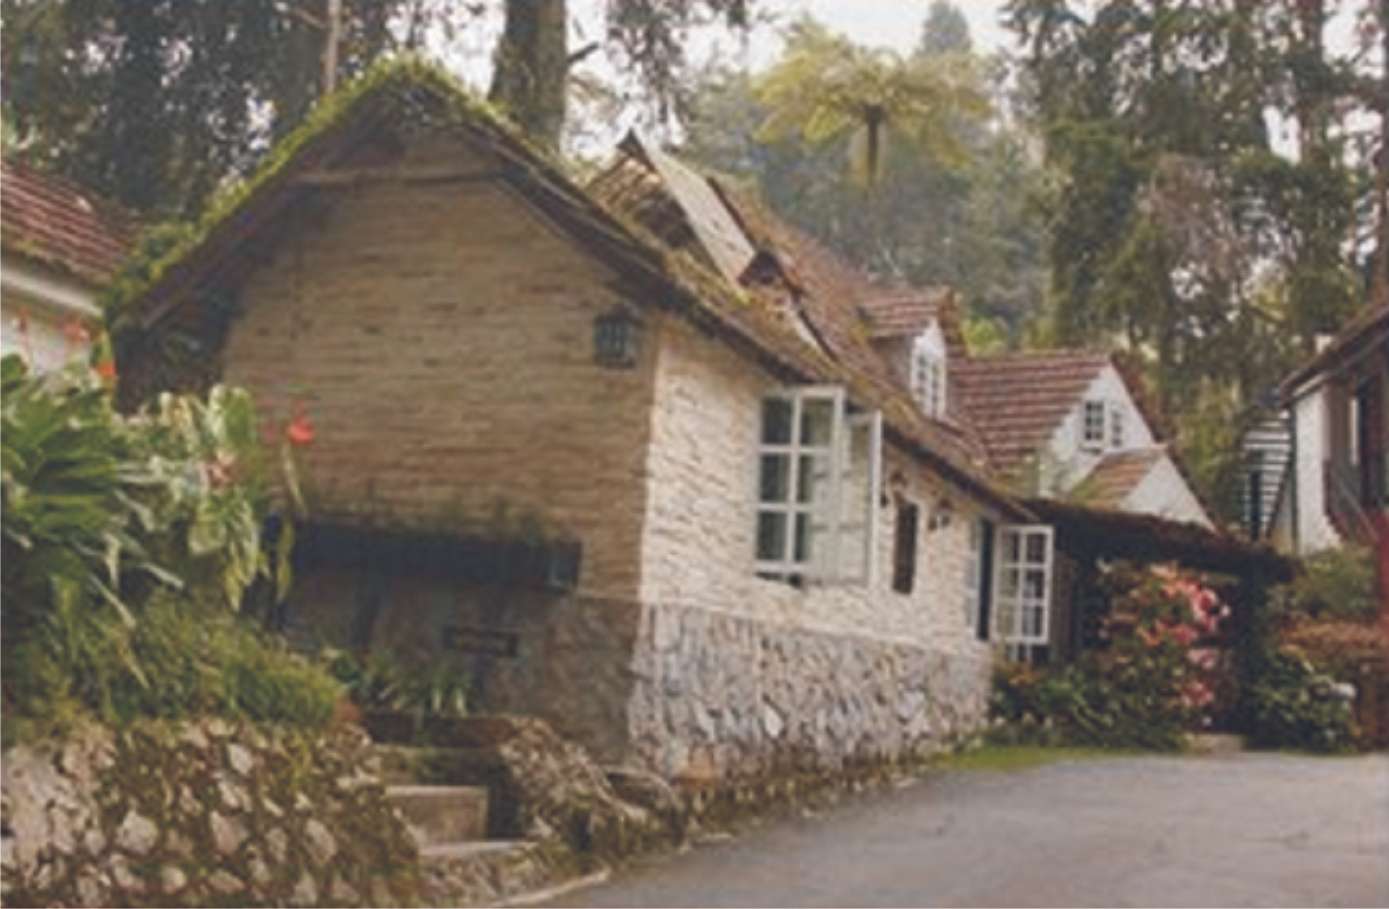 Cottage house jigsaw puzzle online